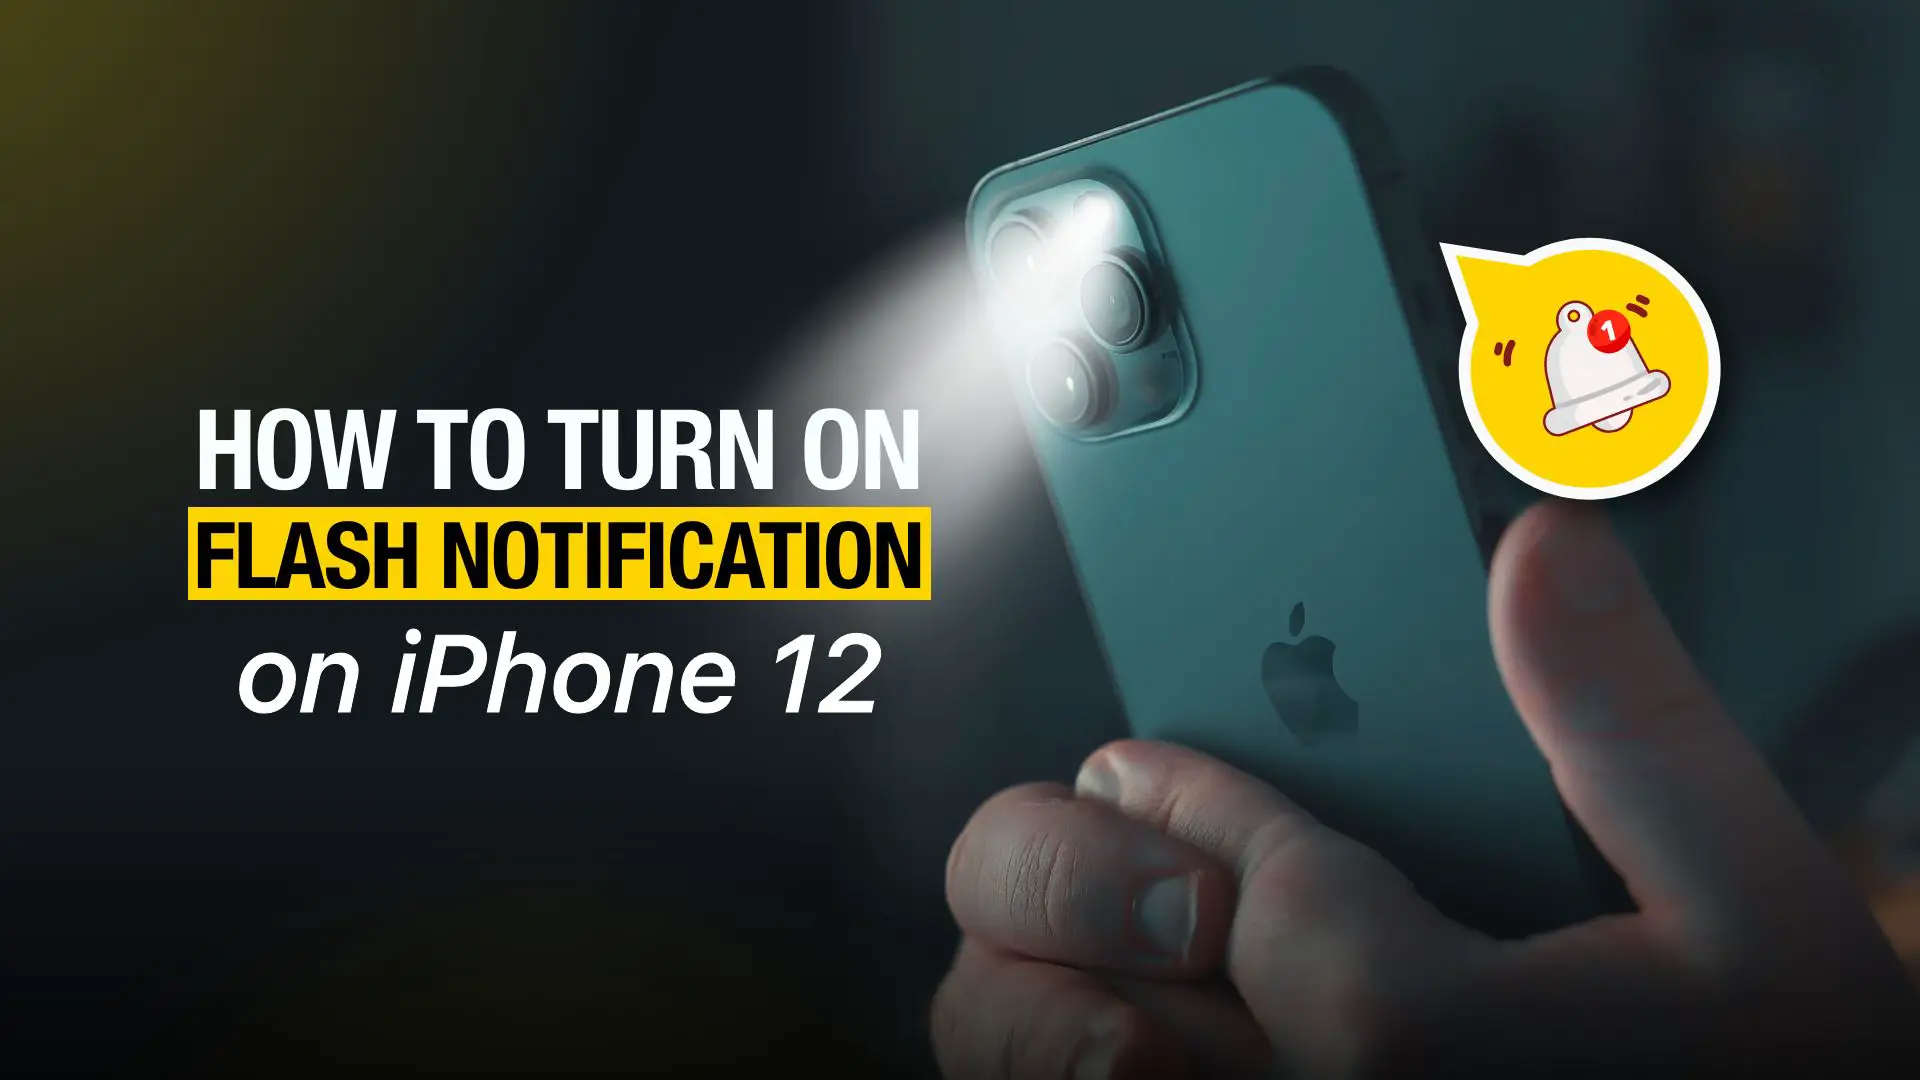 how to turn on flash notification on iPhone 12